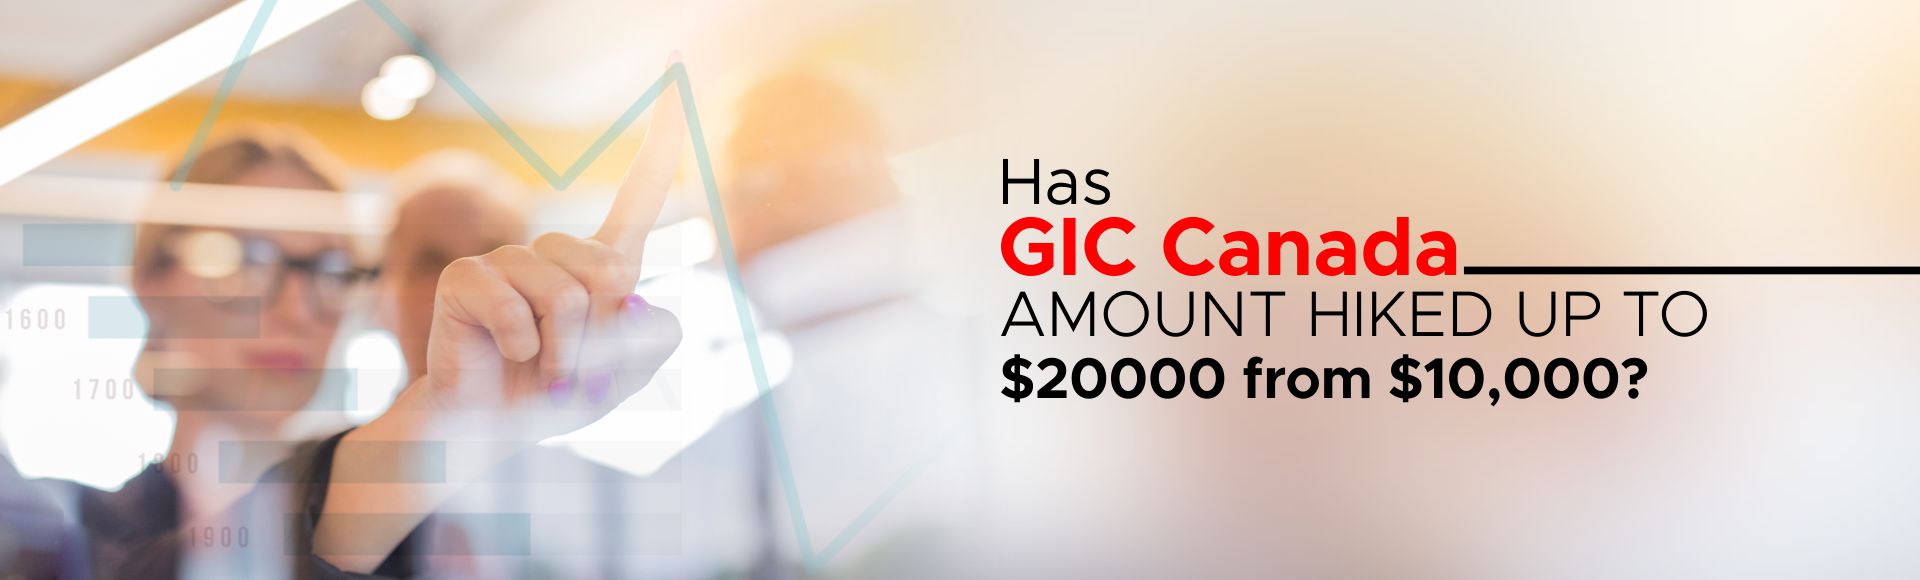 Has GIC Canada amount hiked up to $20000 from $10,000?